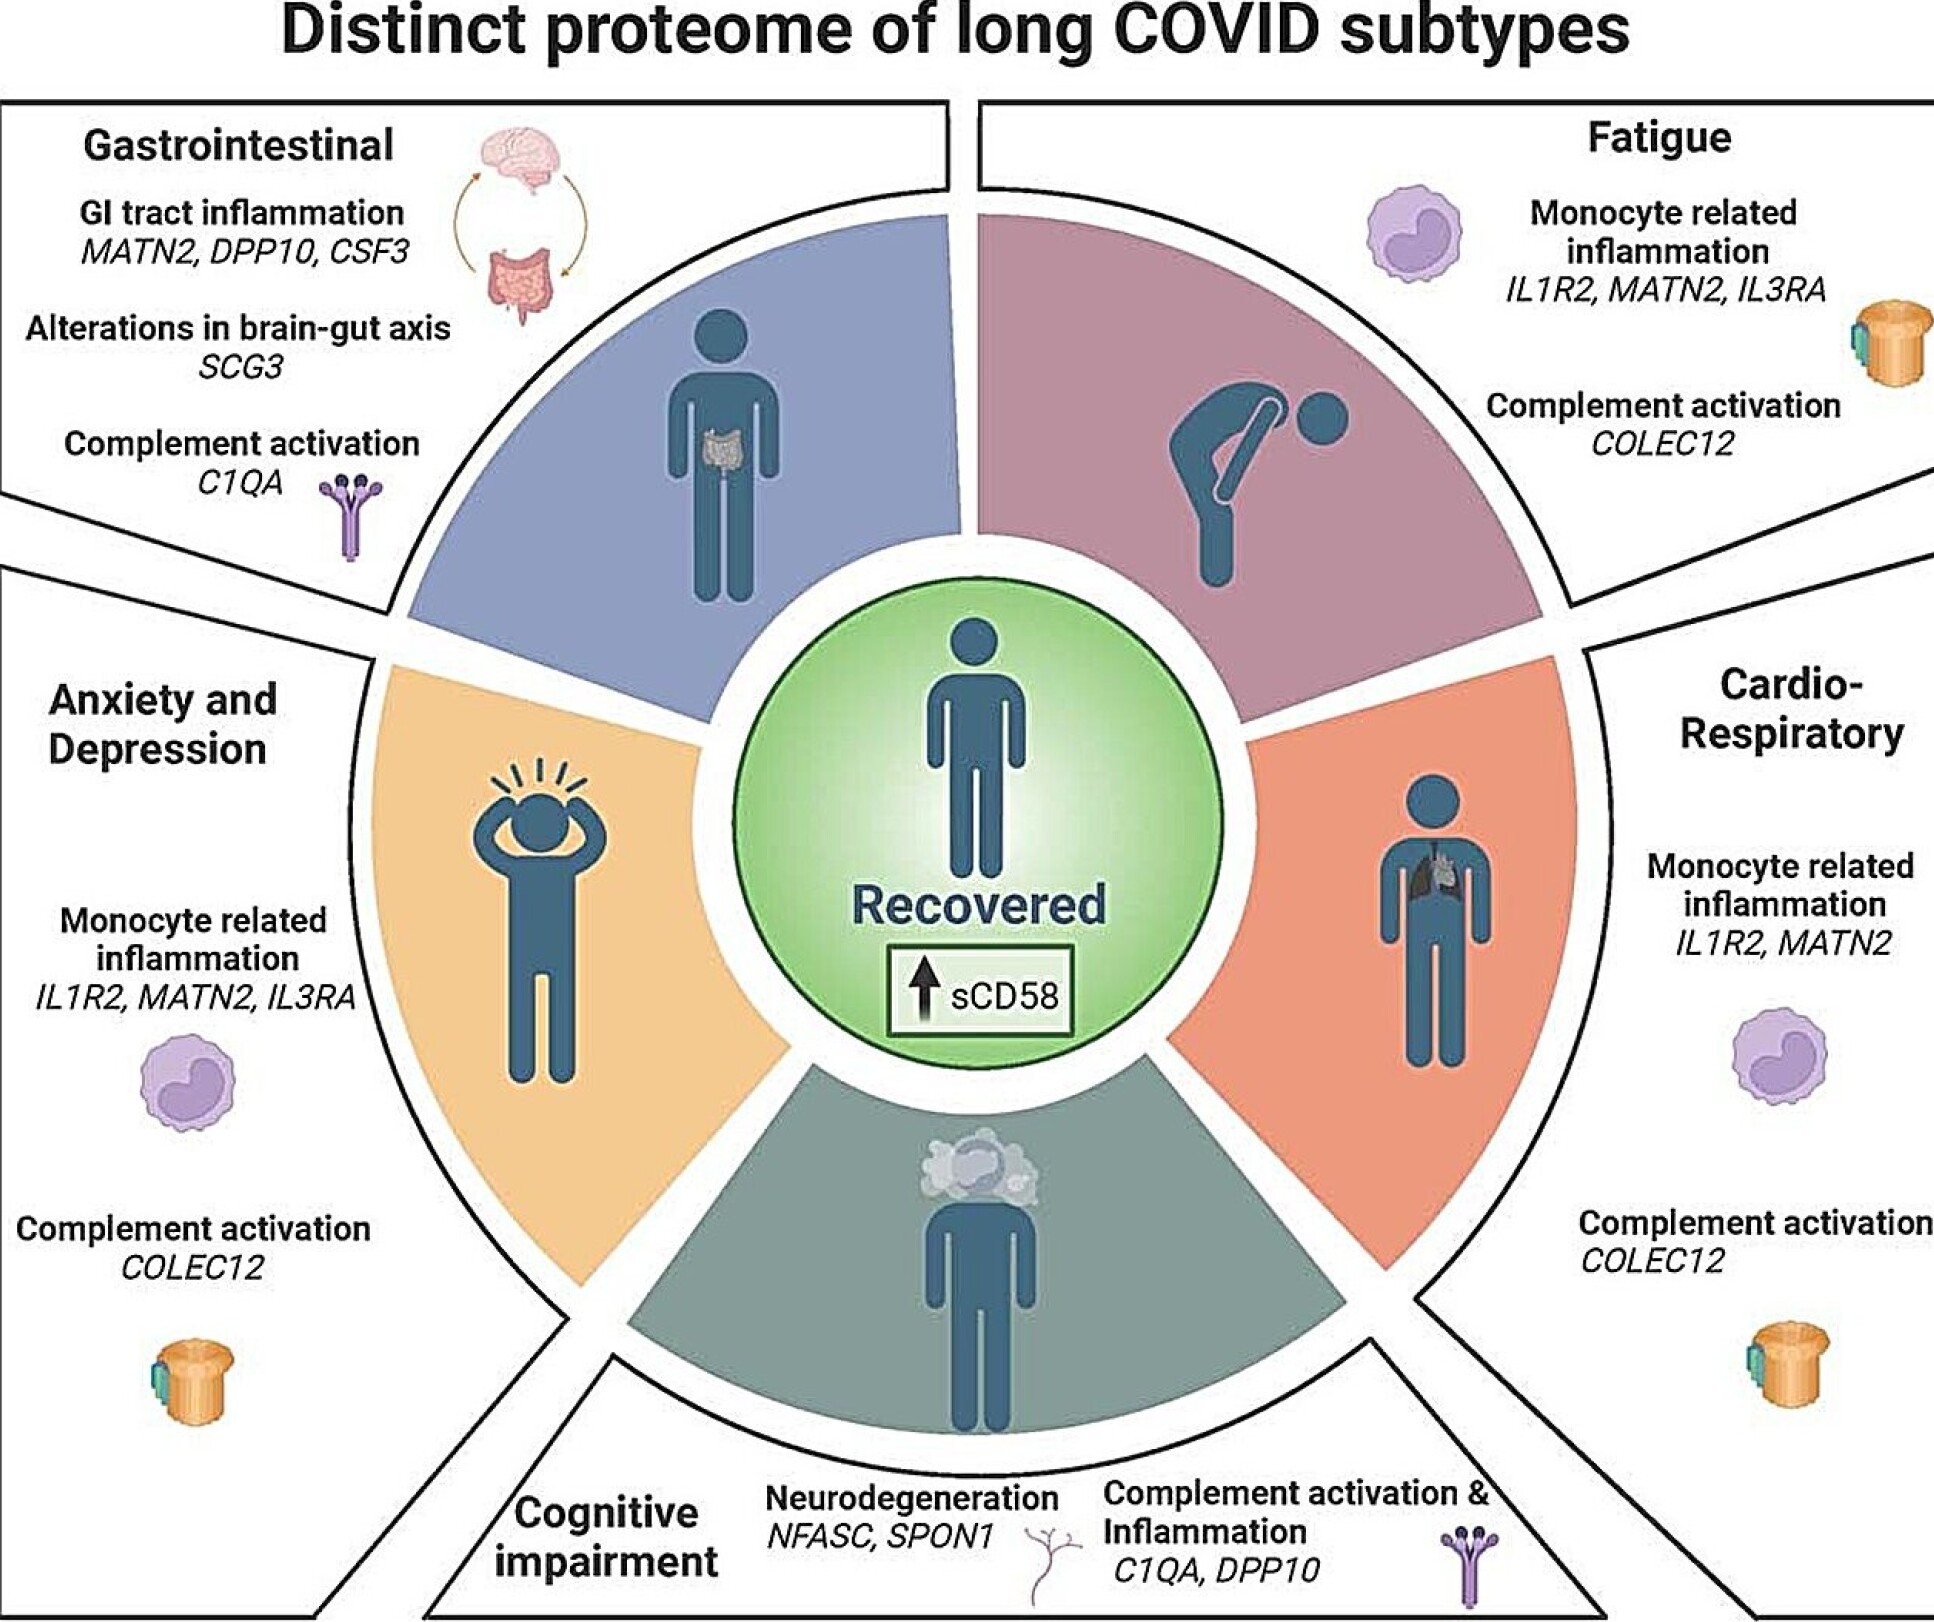 Subtypes of Long COVID